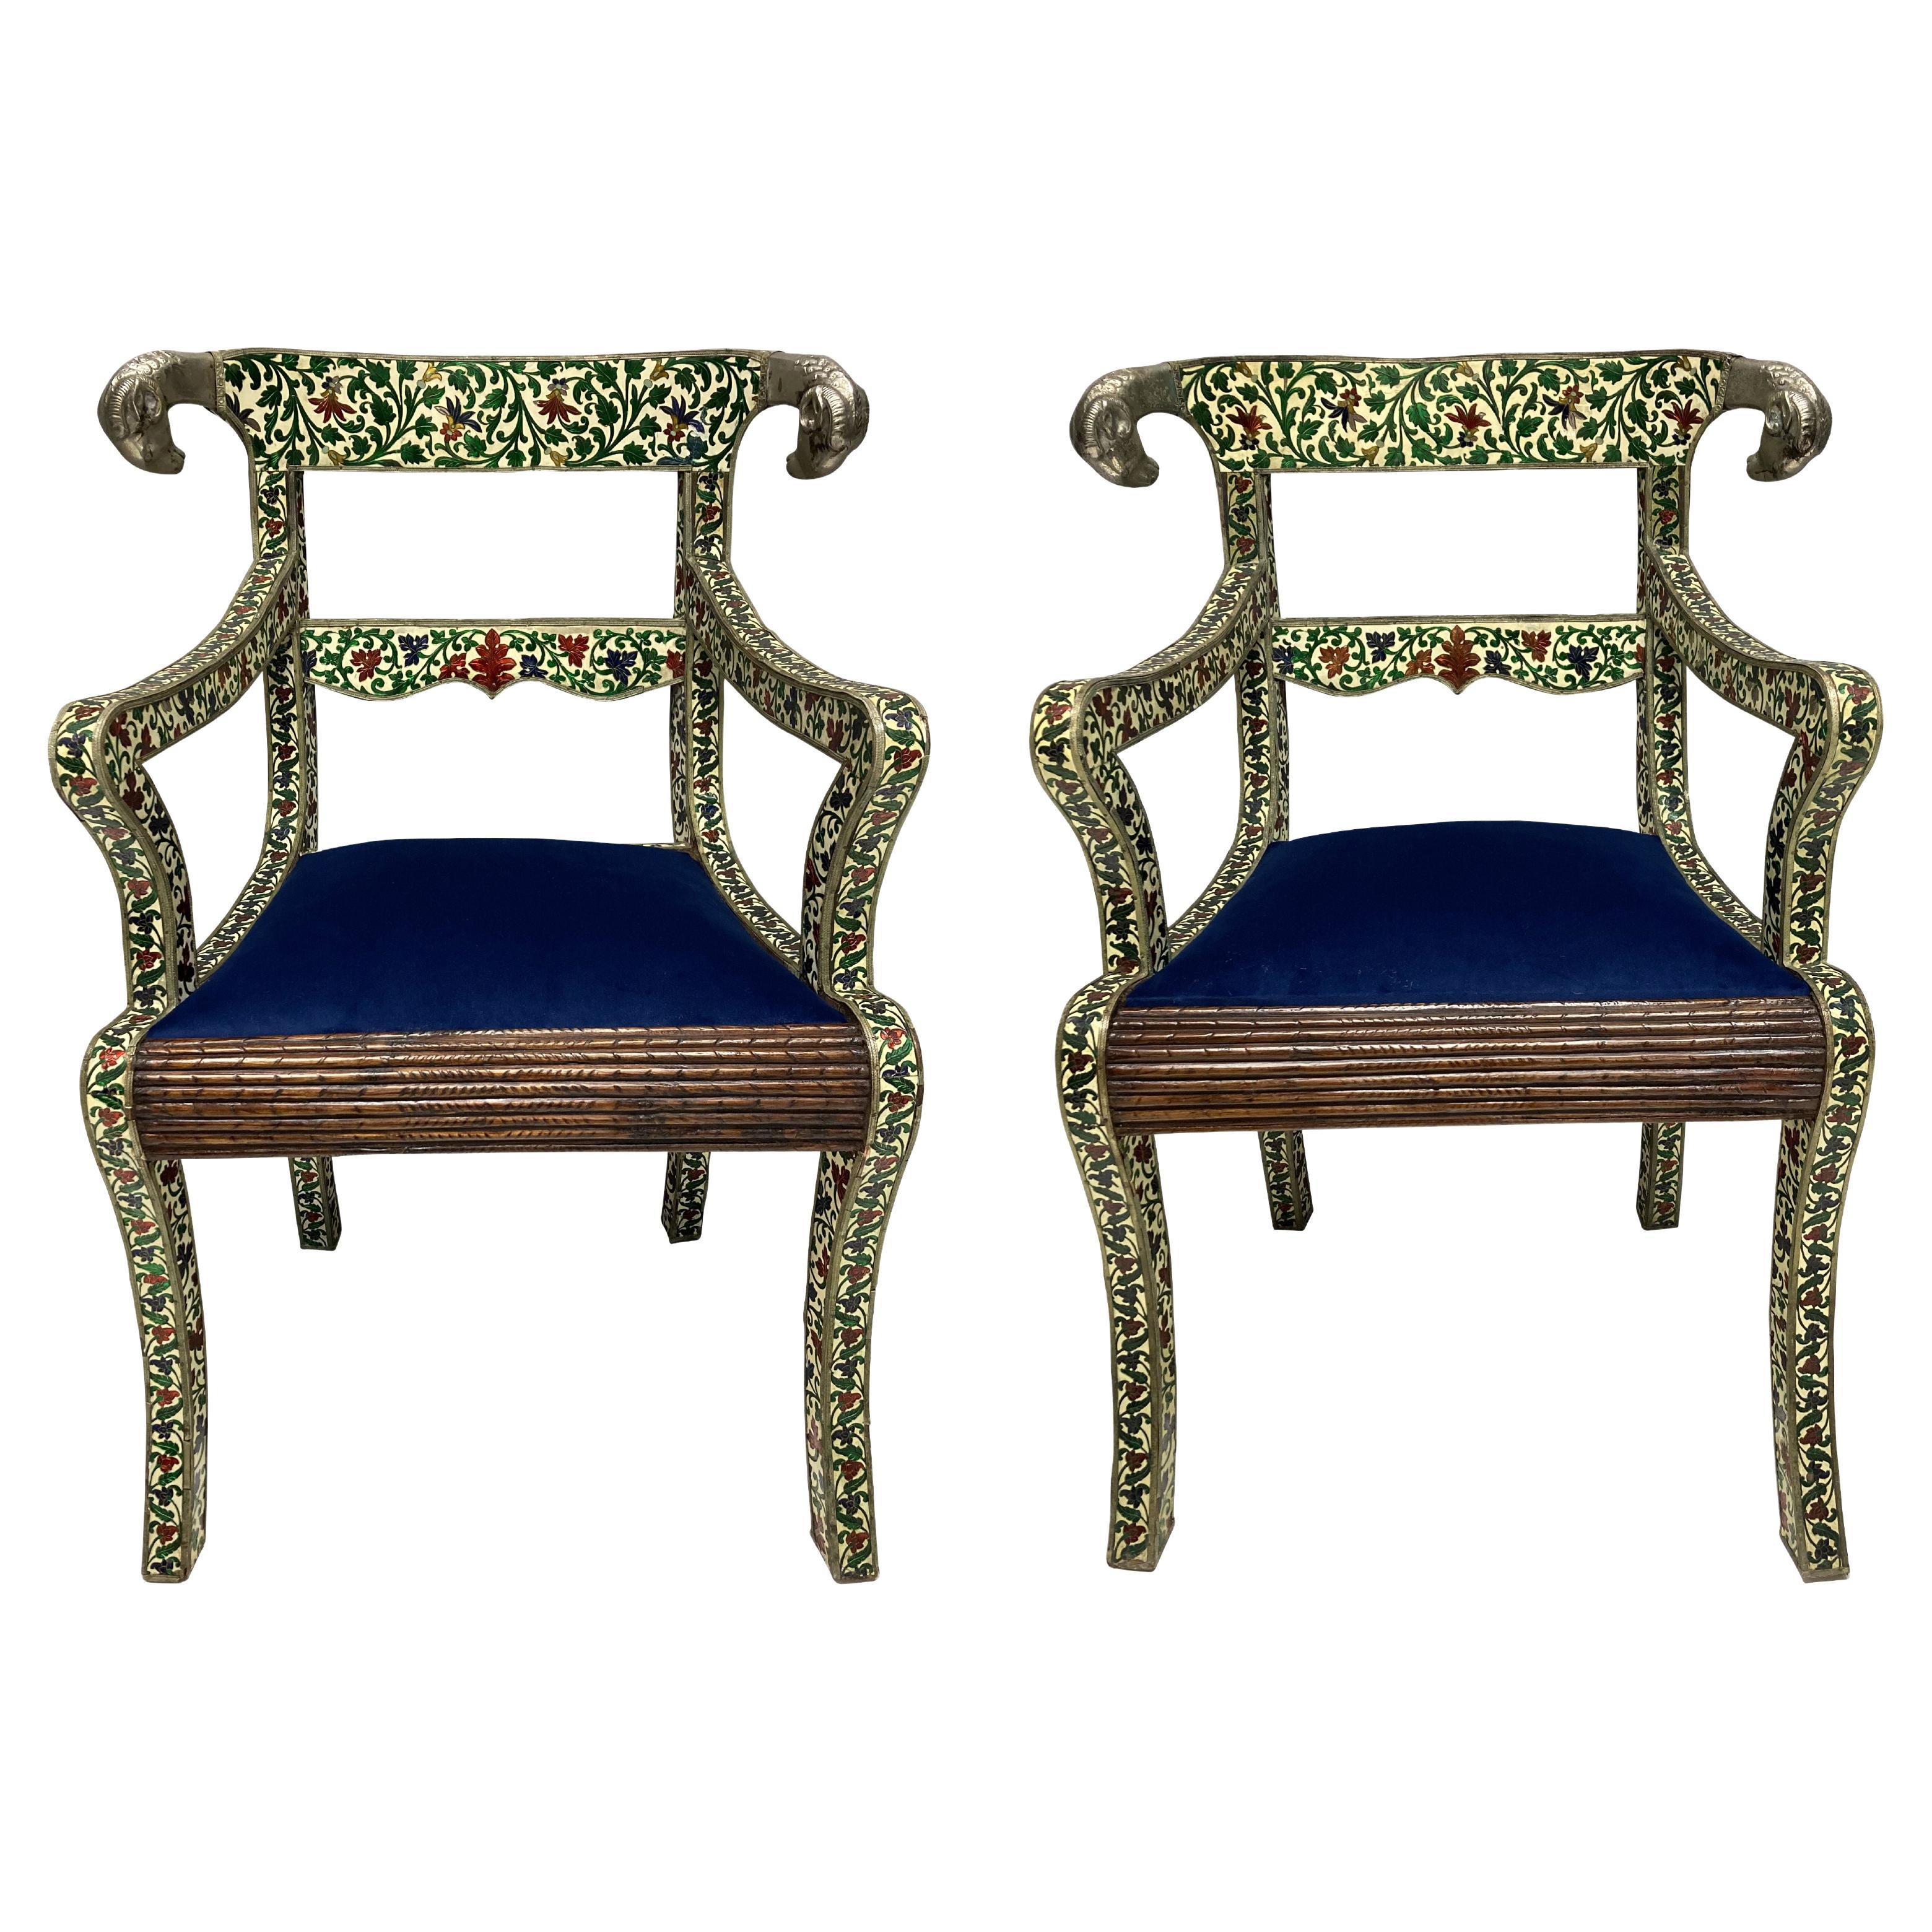 Pair of Rare Indian Cloisonne & Silver Armchairs